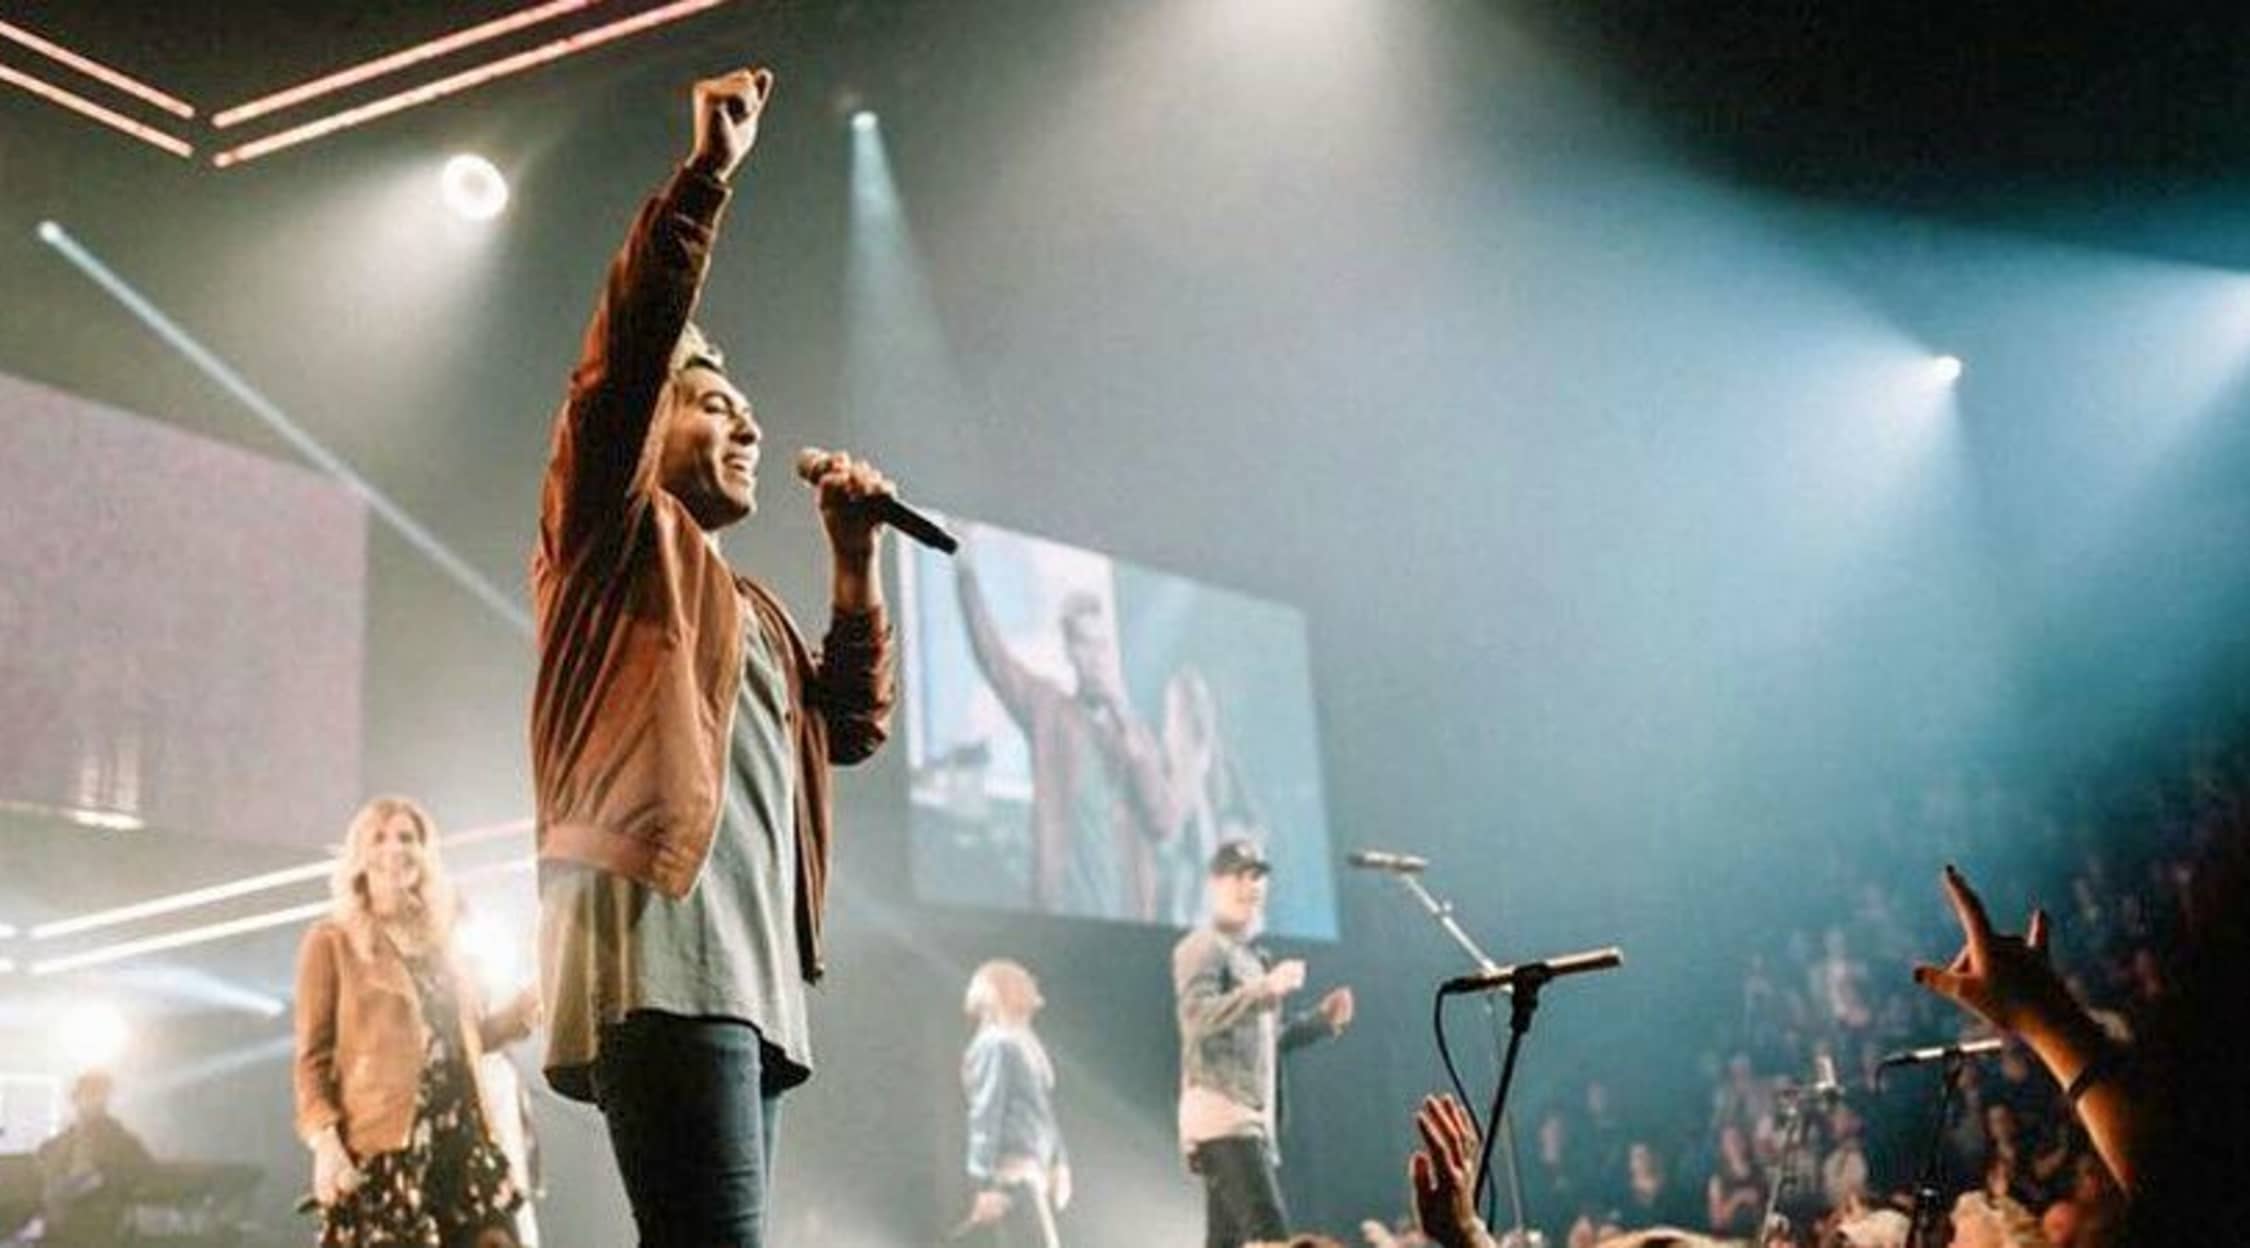 Elevation Worship Tickets Elevation Worship Concert Tickets and Tour